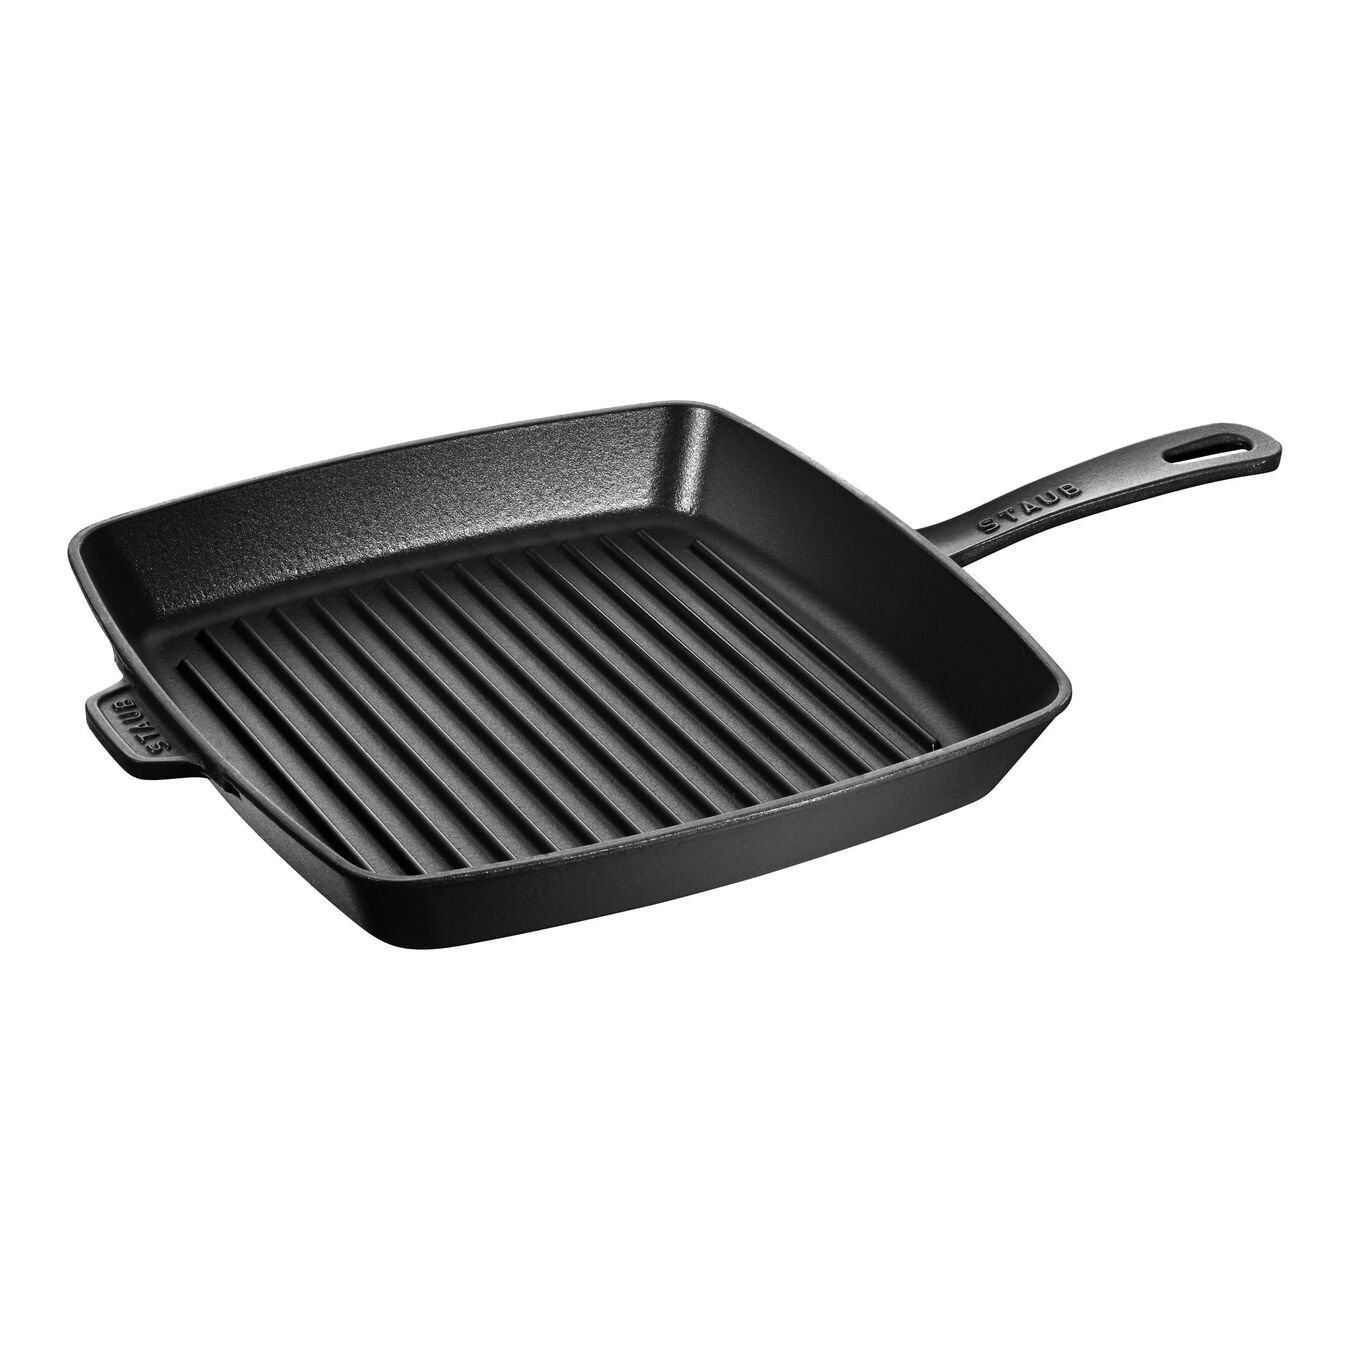 12-inch, cast iron, square, American grill, black matte - Visual Imperfections,,large 1